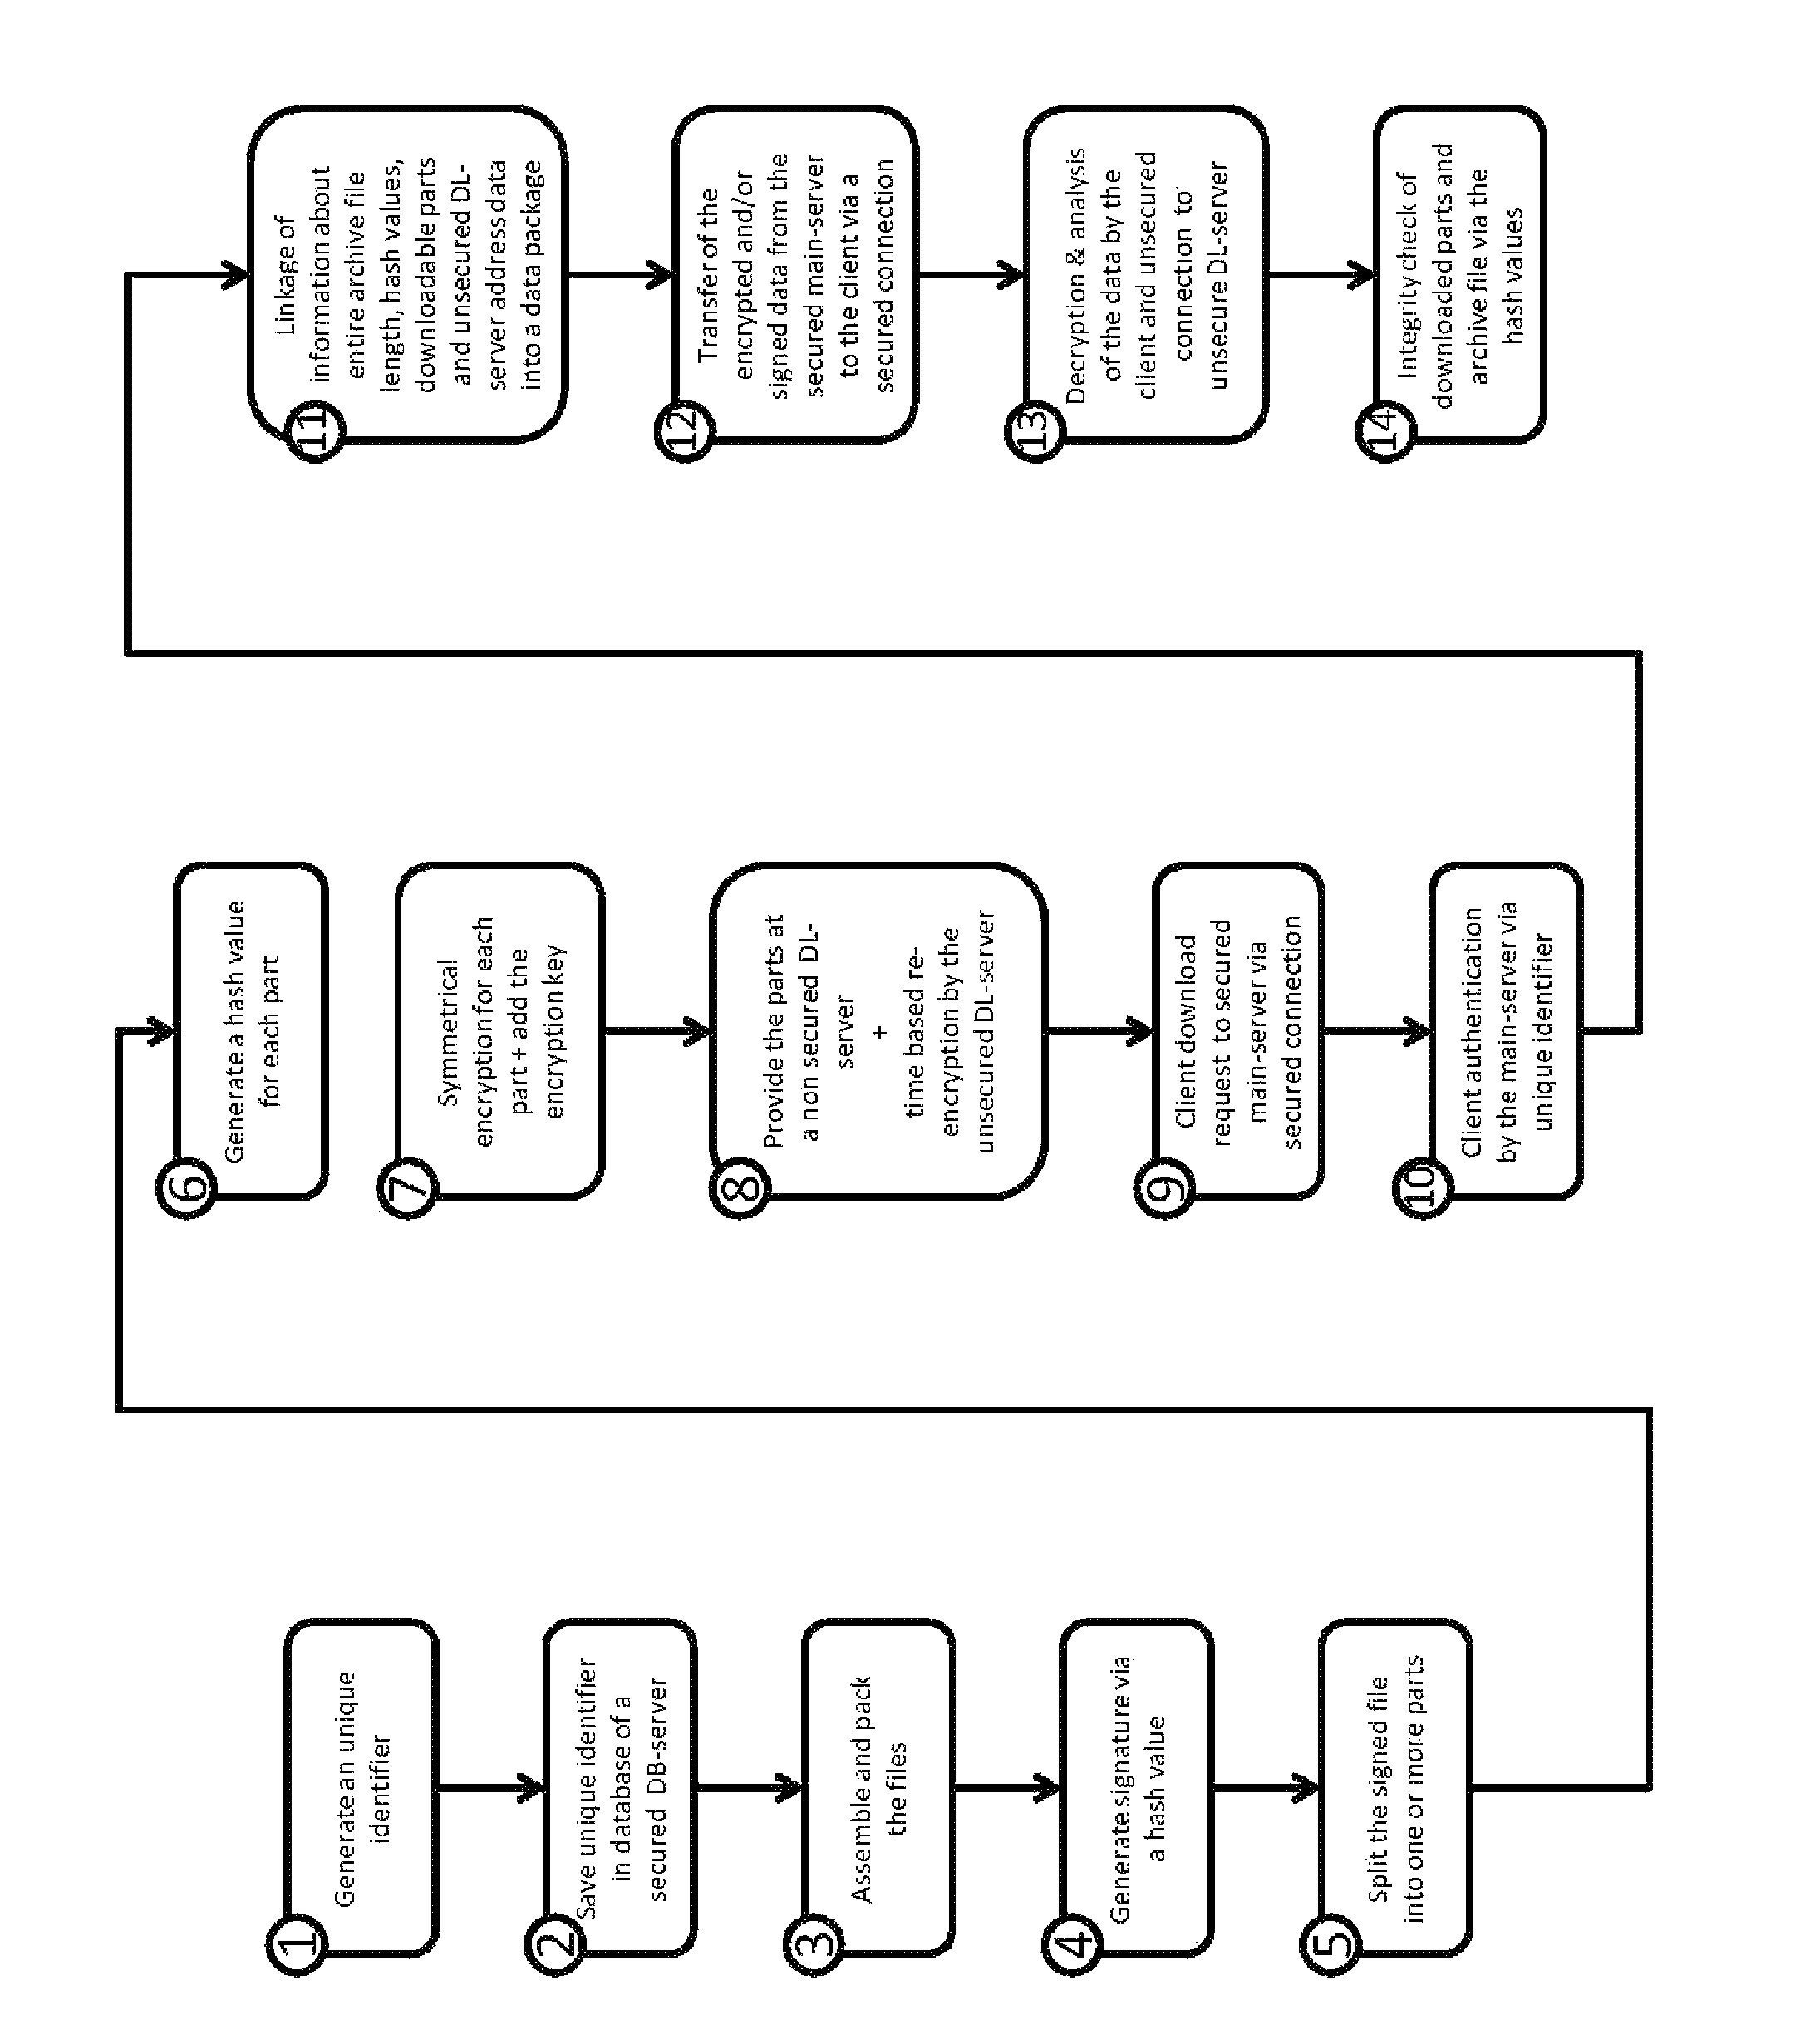 Method for securely downloading from distributed download sources